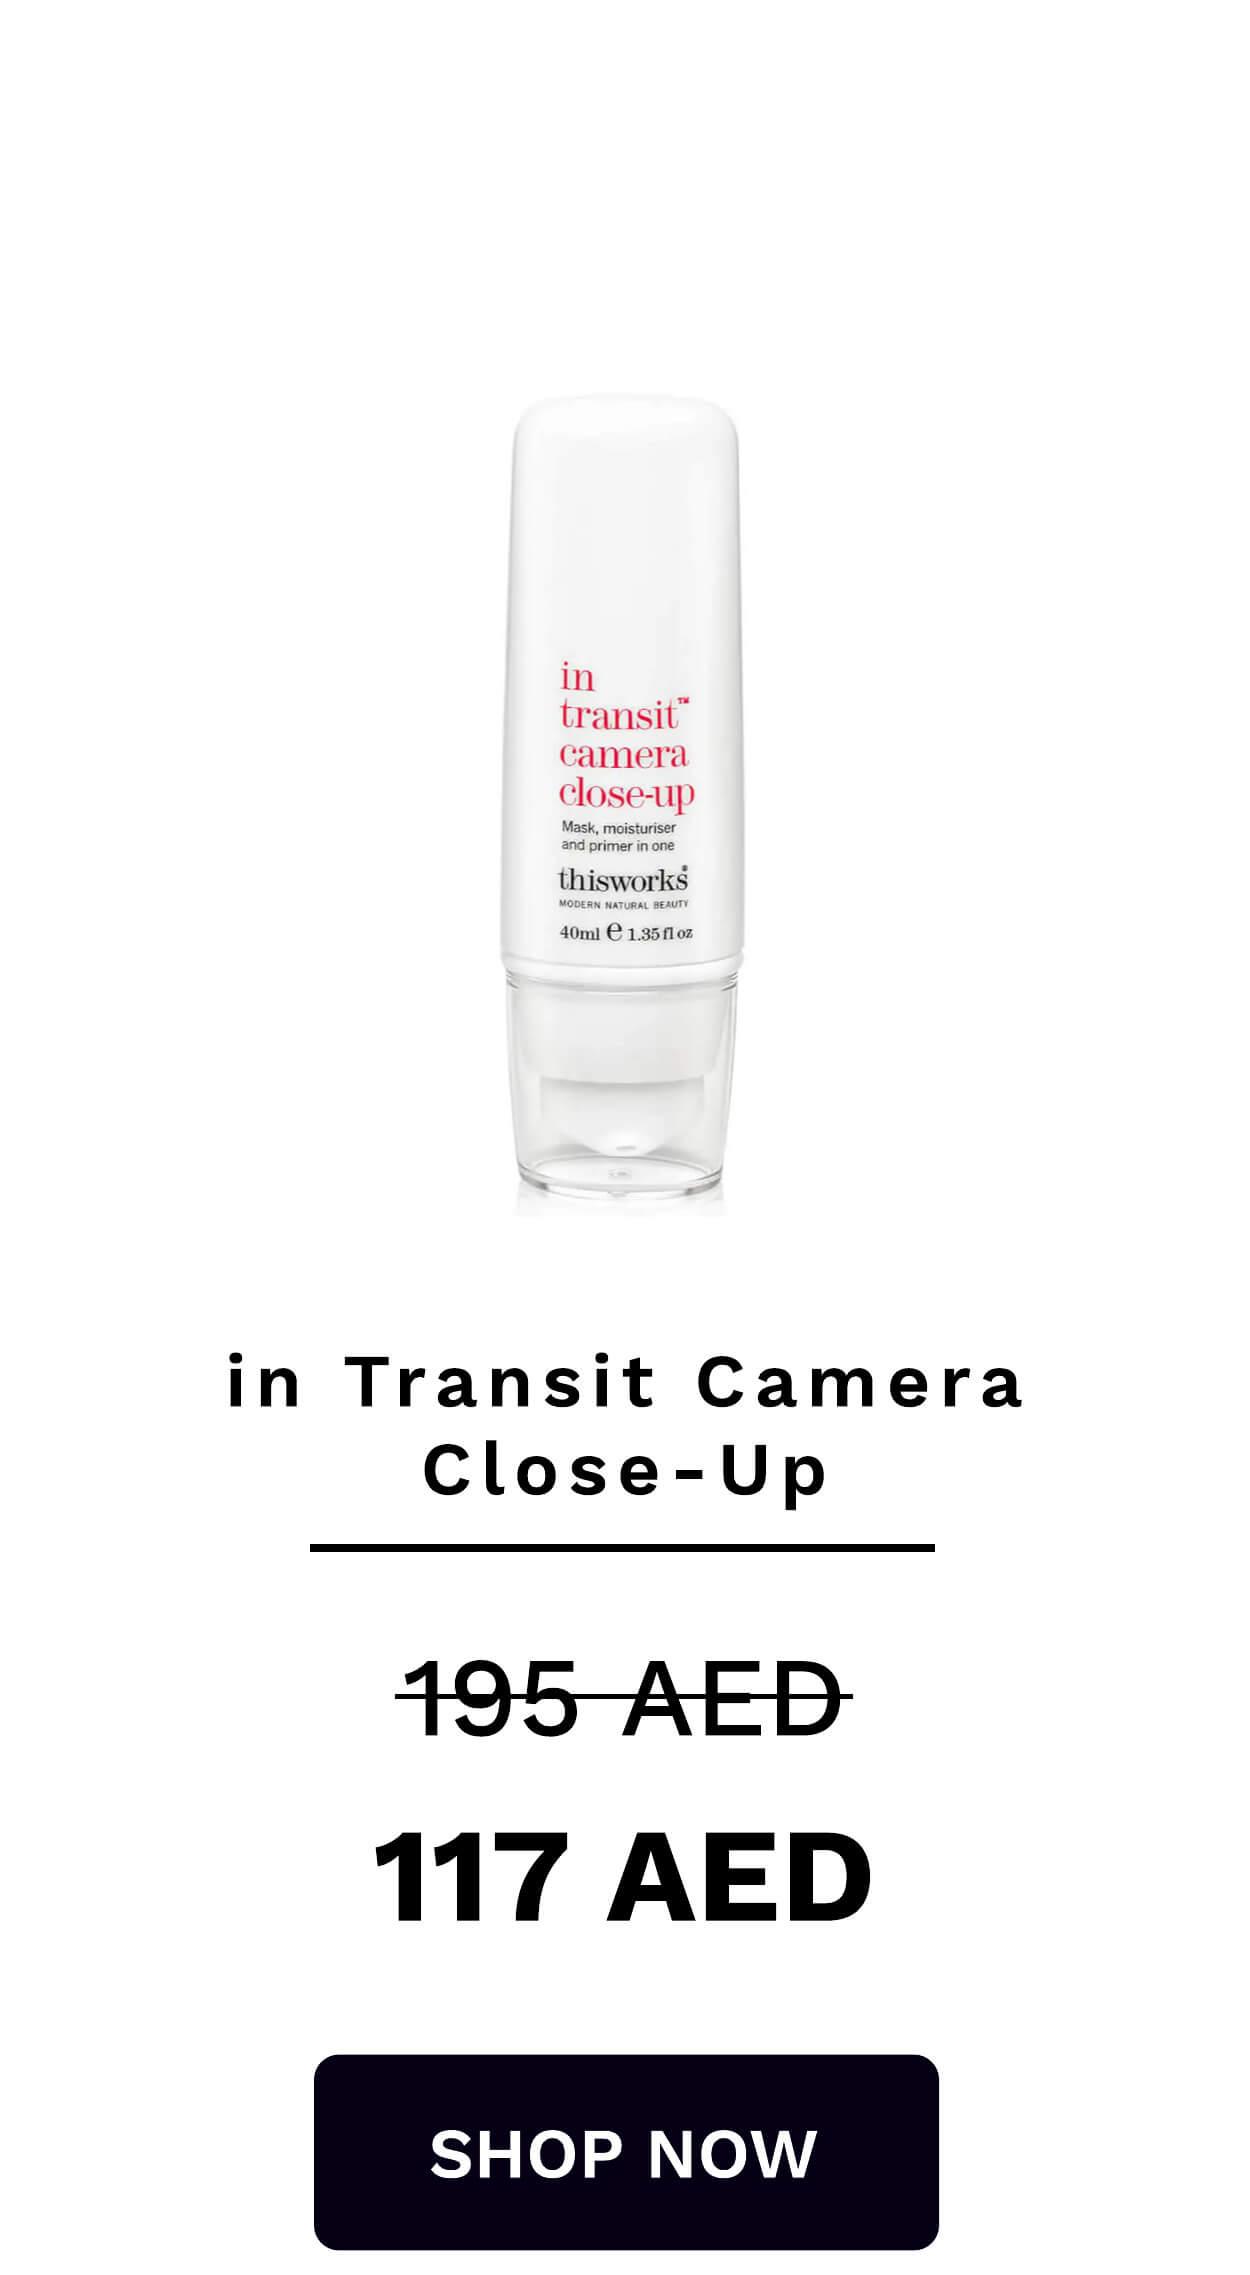 Mask, moisturiser and primer in one in Transit Camera Close-Up 195-AED 117 AED SHOP NOW 